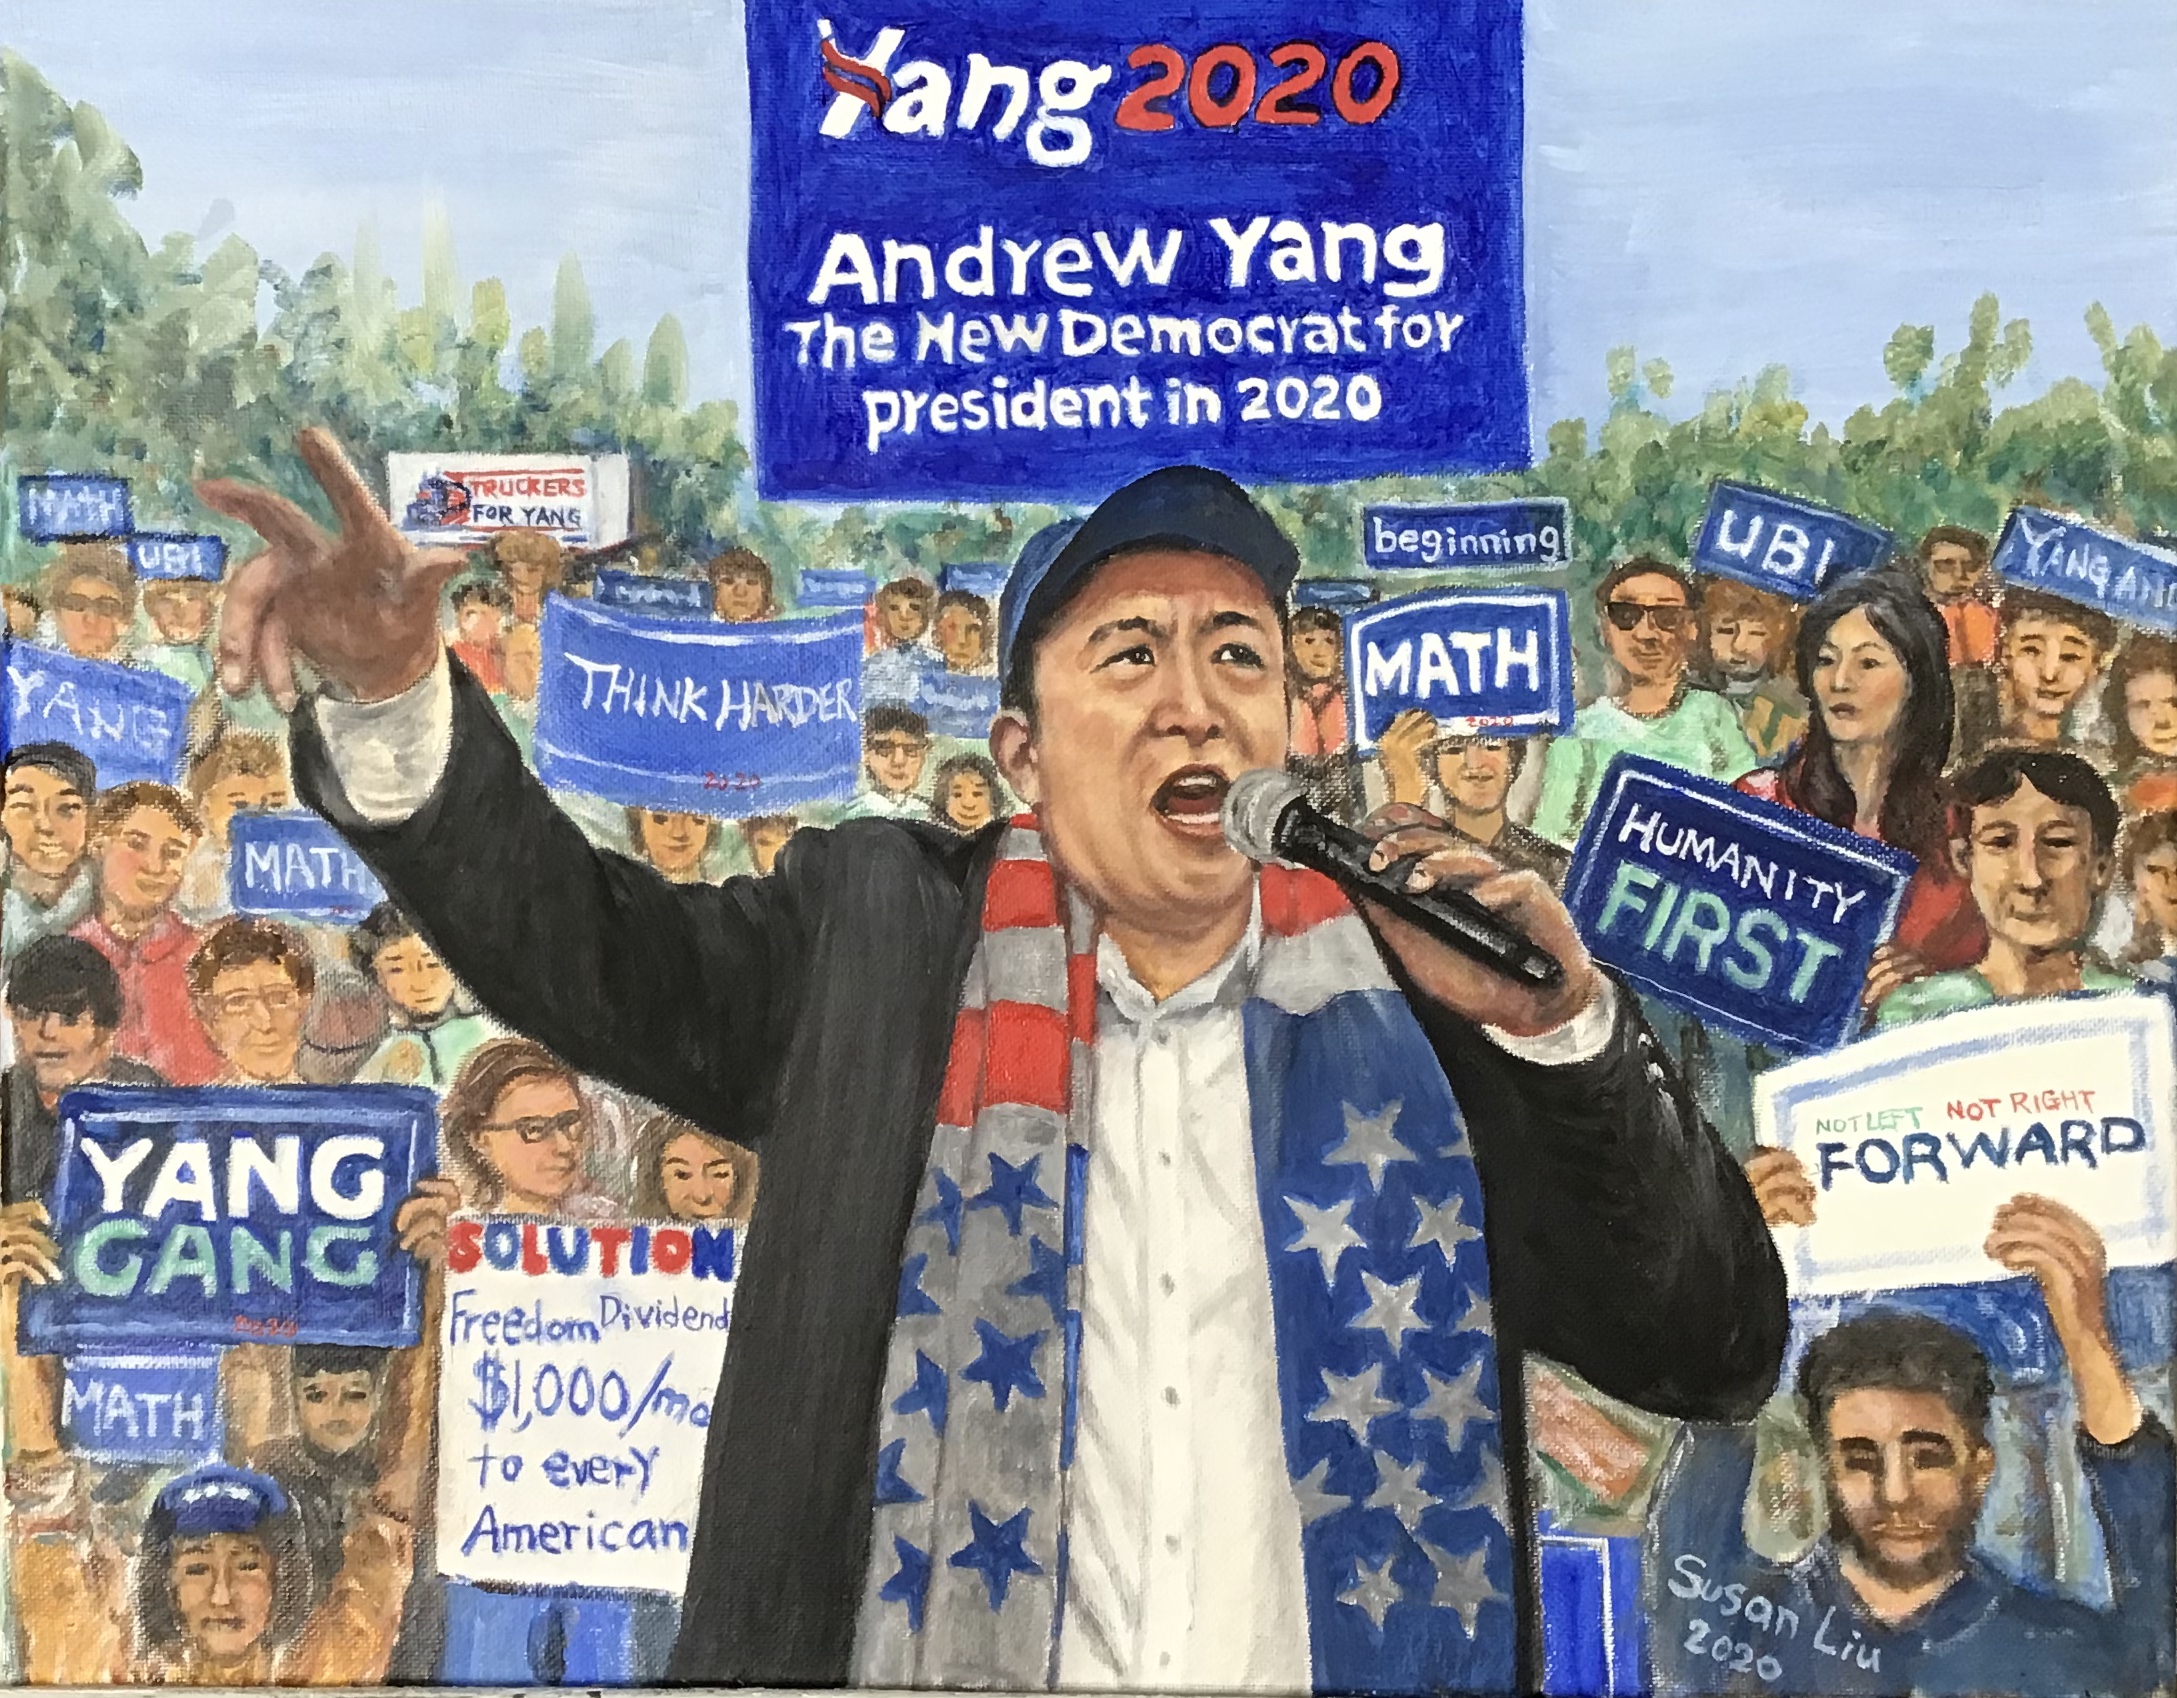 31. Andrew Yang in 2020 U. S. Presidential Election By Artist Susan Hsiu-fang Liu(陳秀芳)/2020